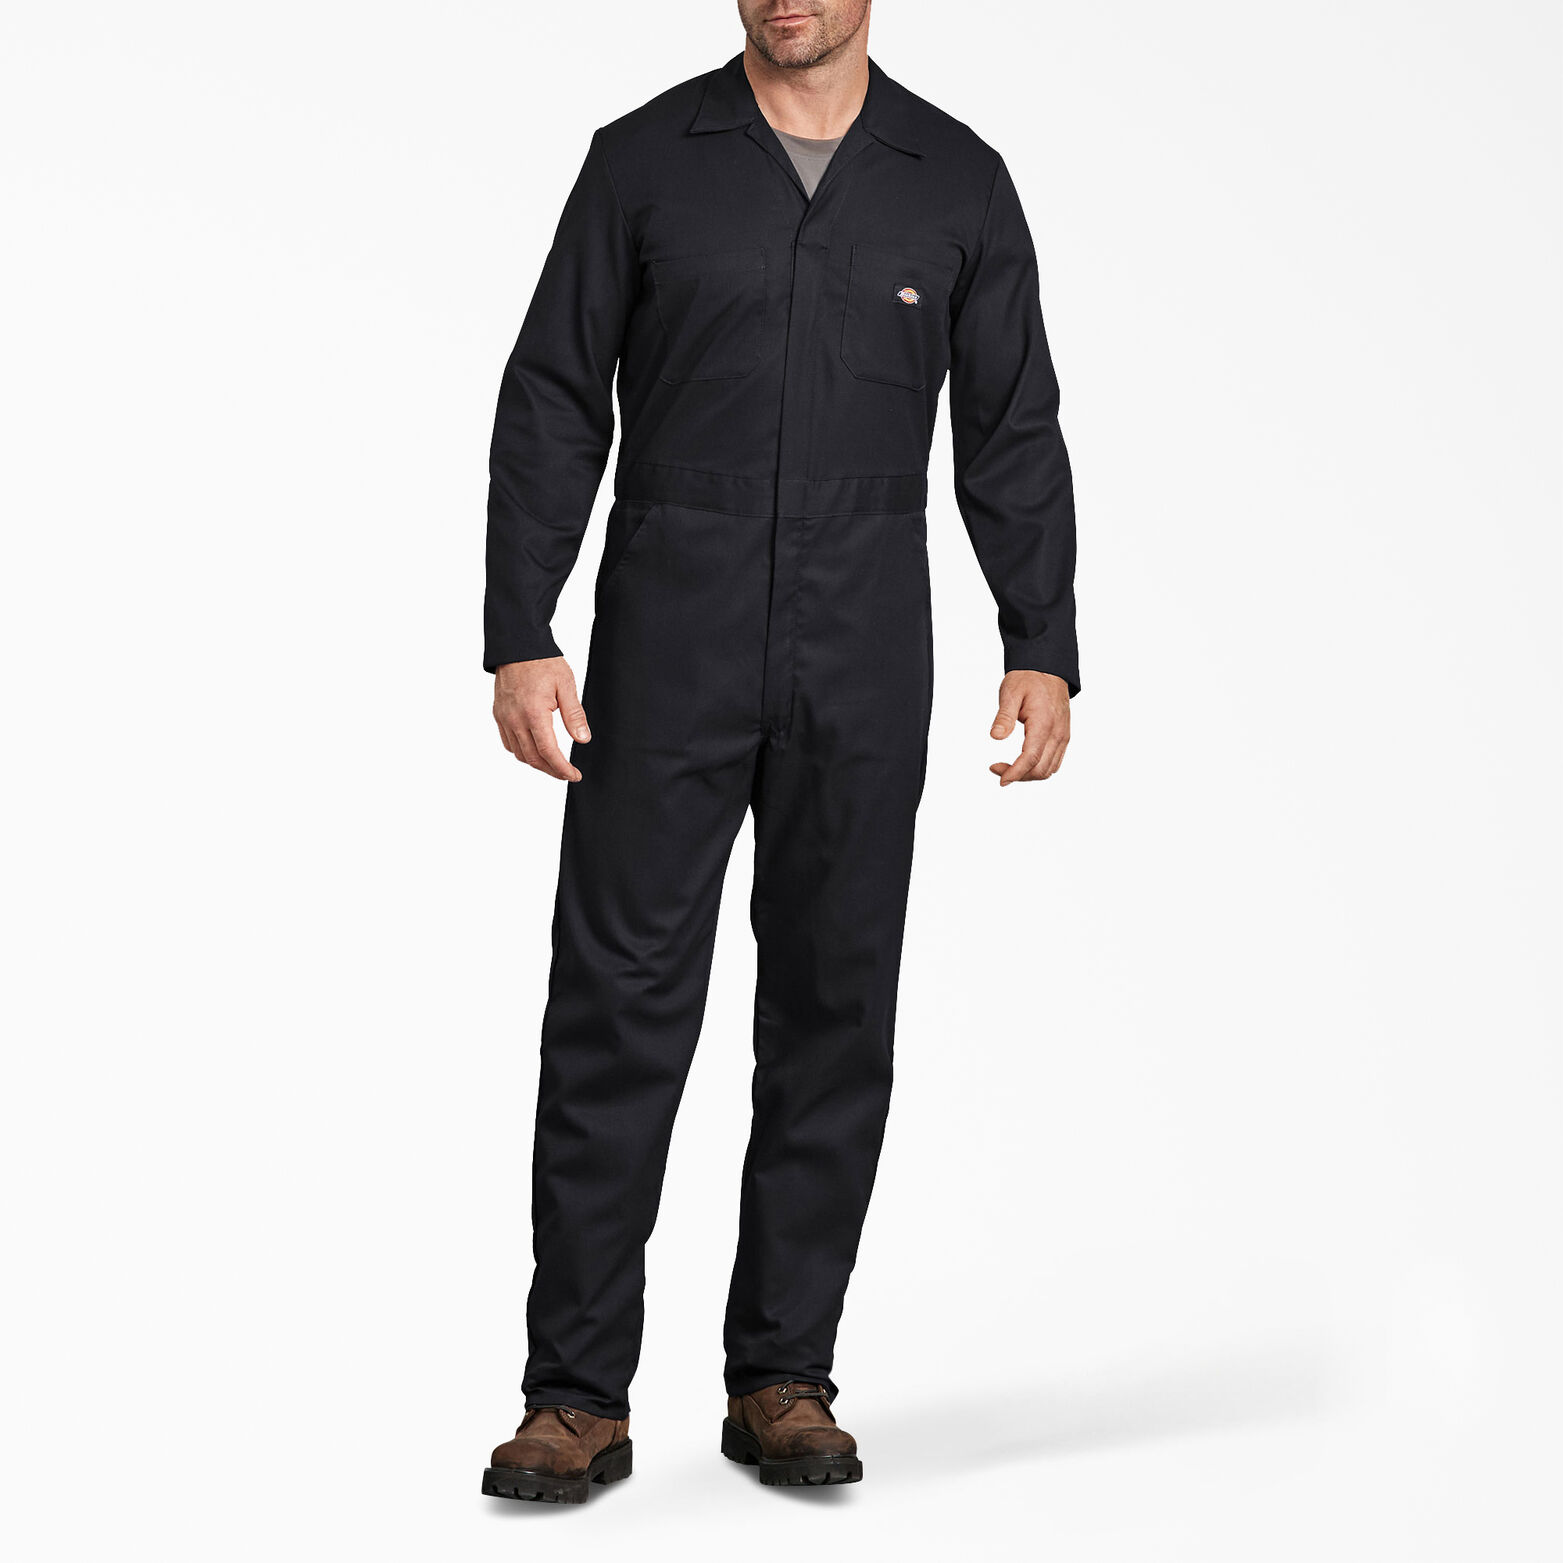 Mens Work Coveralls In Mens Occupational And Workwear | atelier-yuwa ...